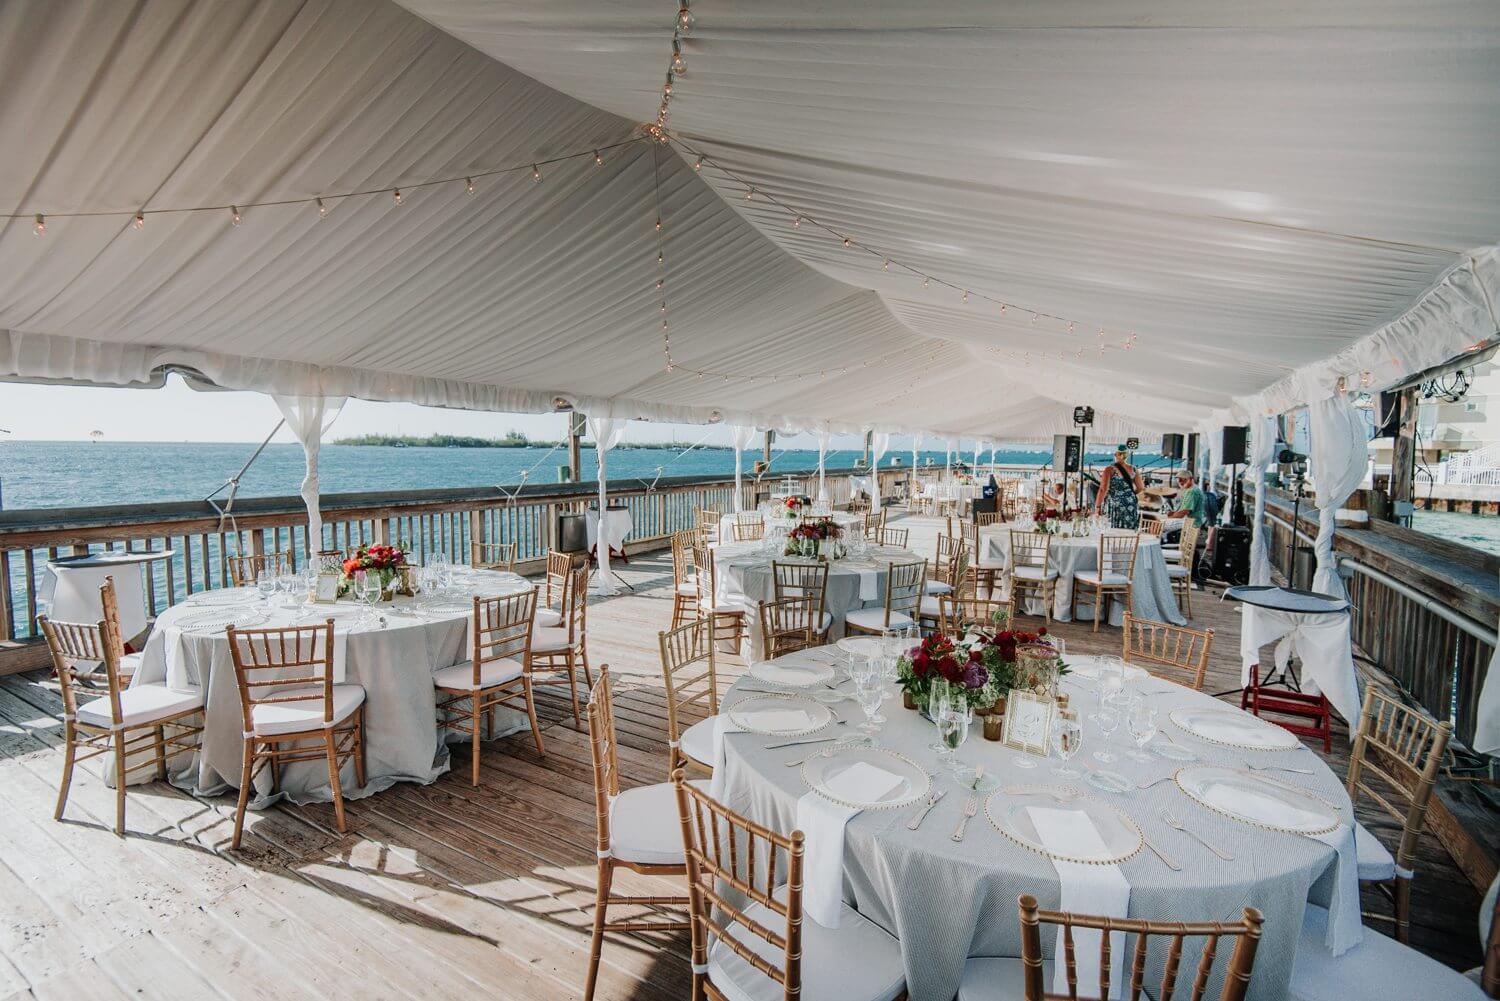 A wedding reception overlooking the water at Ocean Key Resort Spa in Key West.